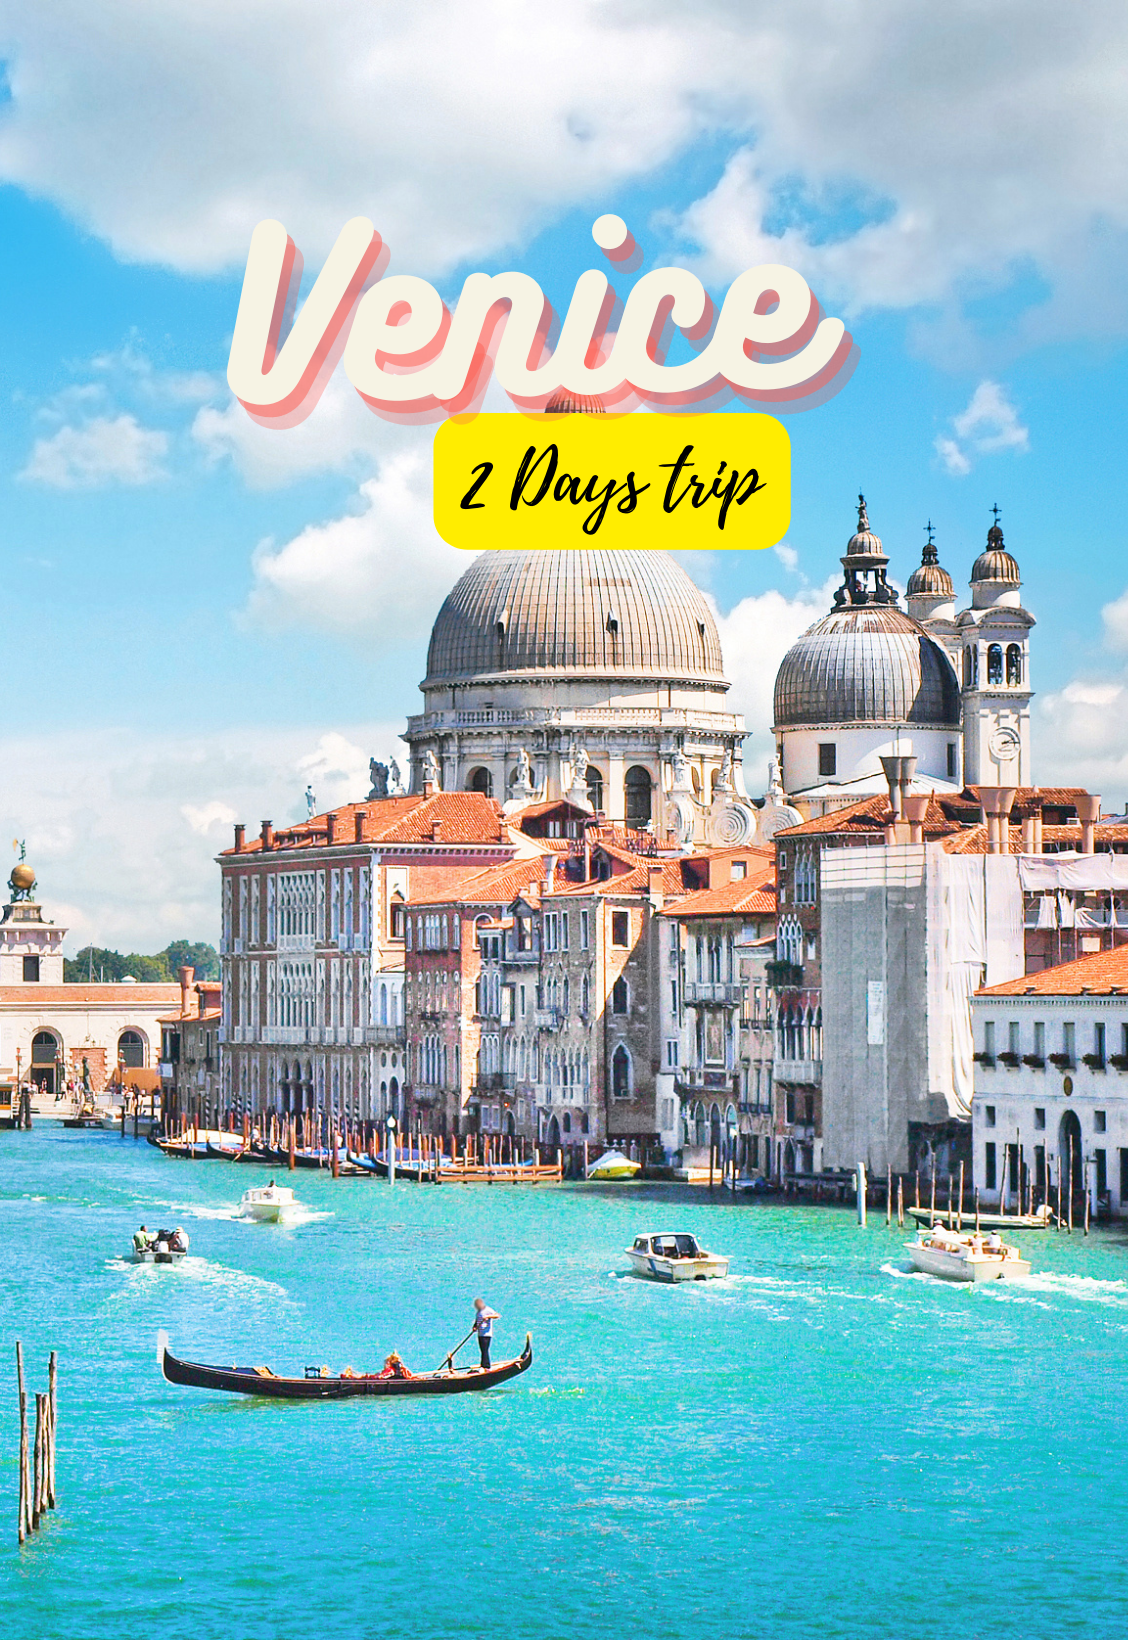 2 Days In Venice - Top Things to Do